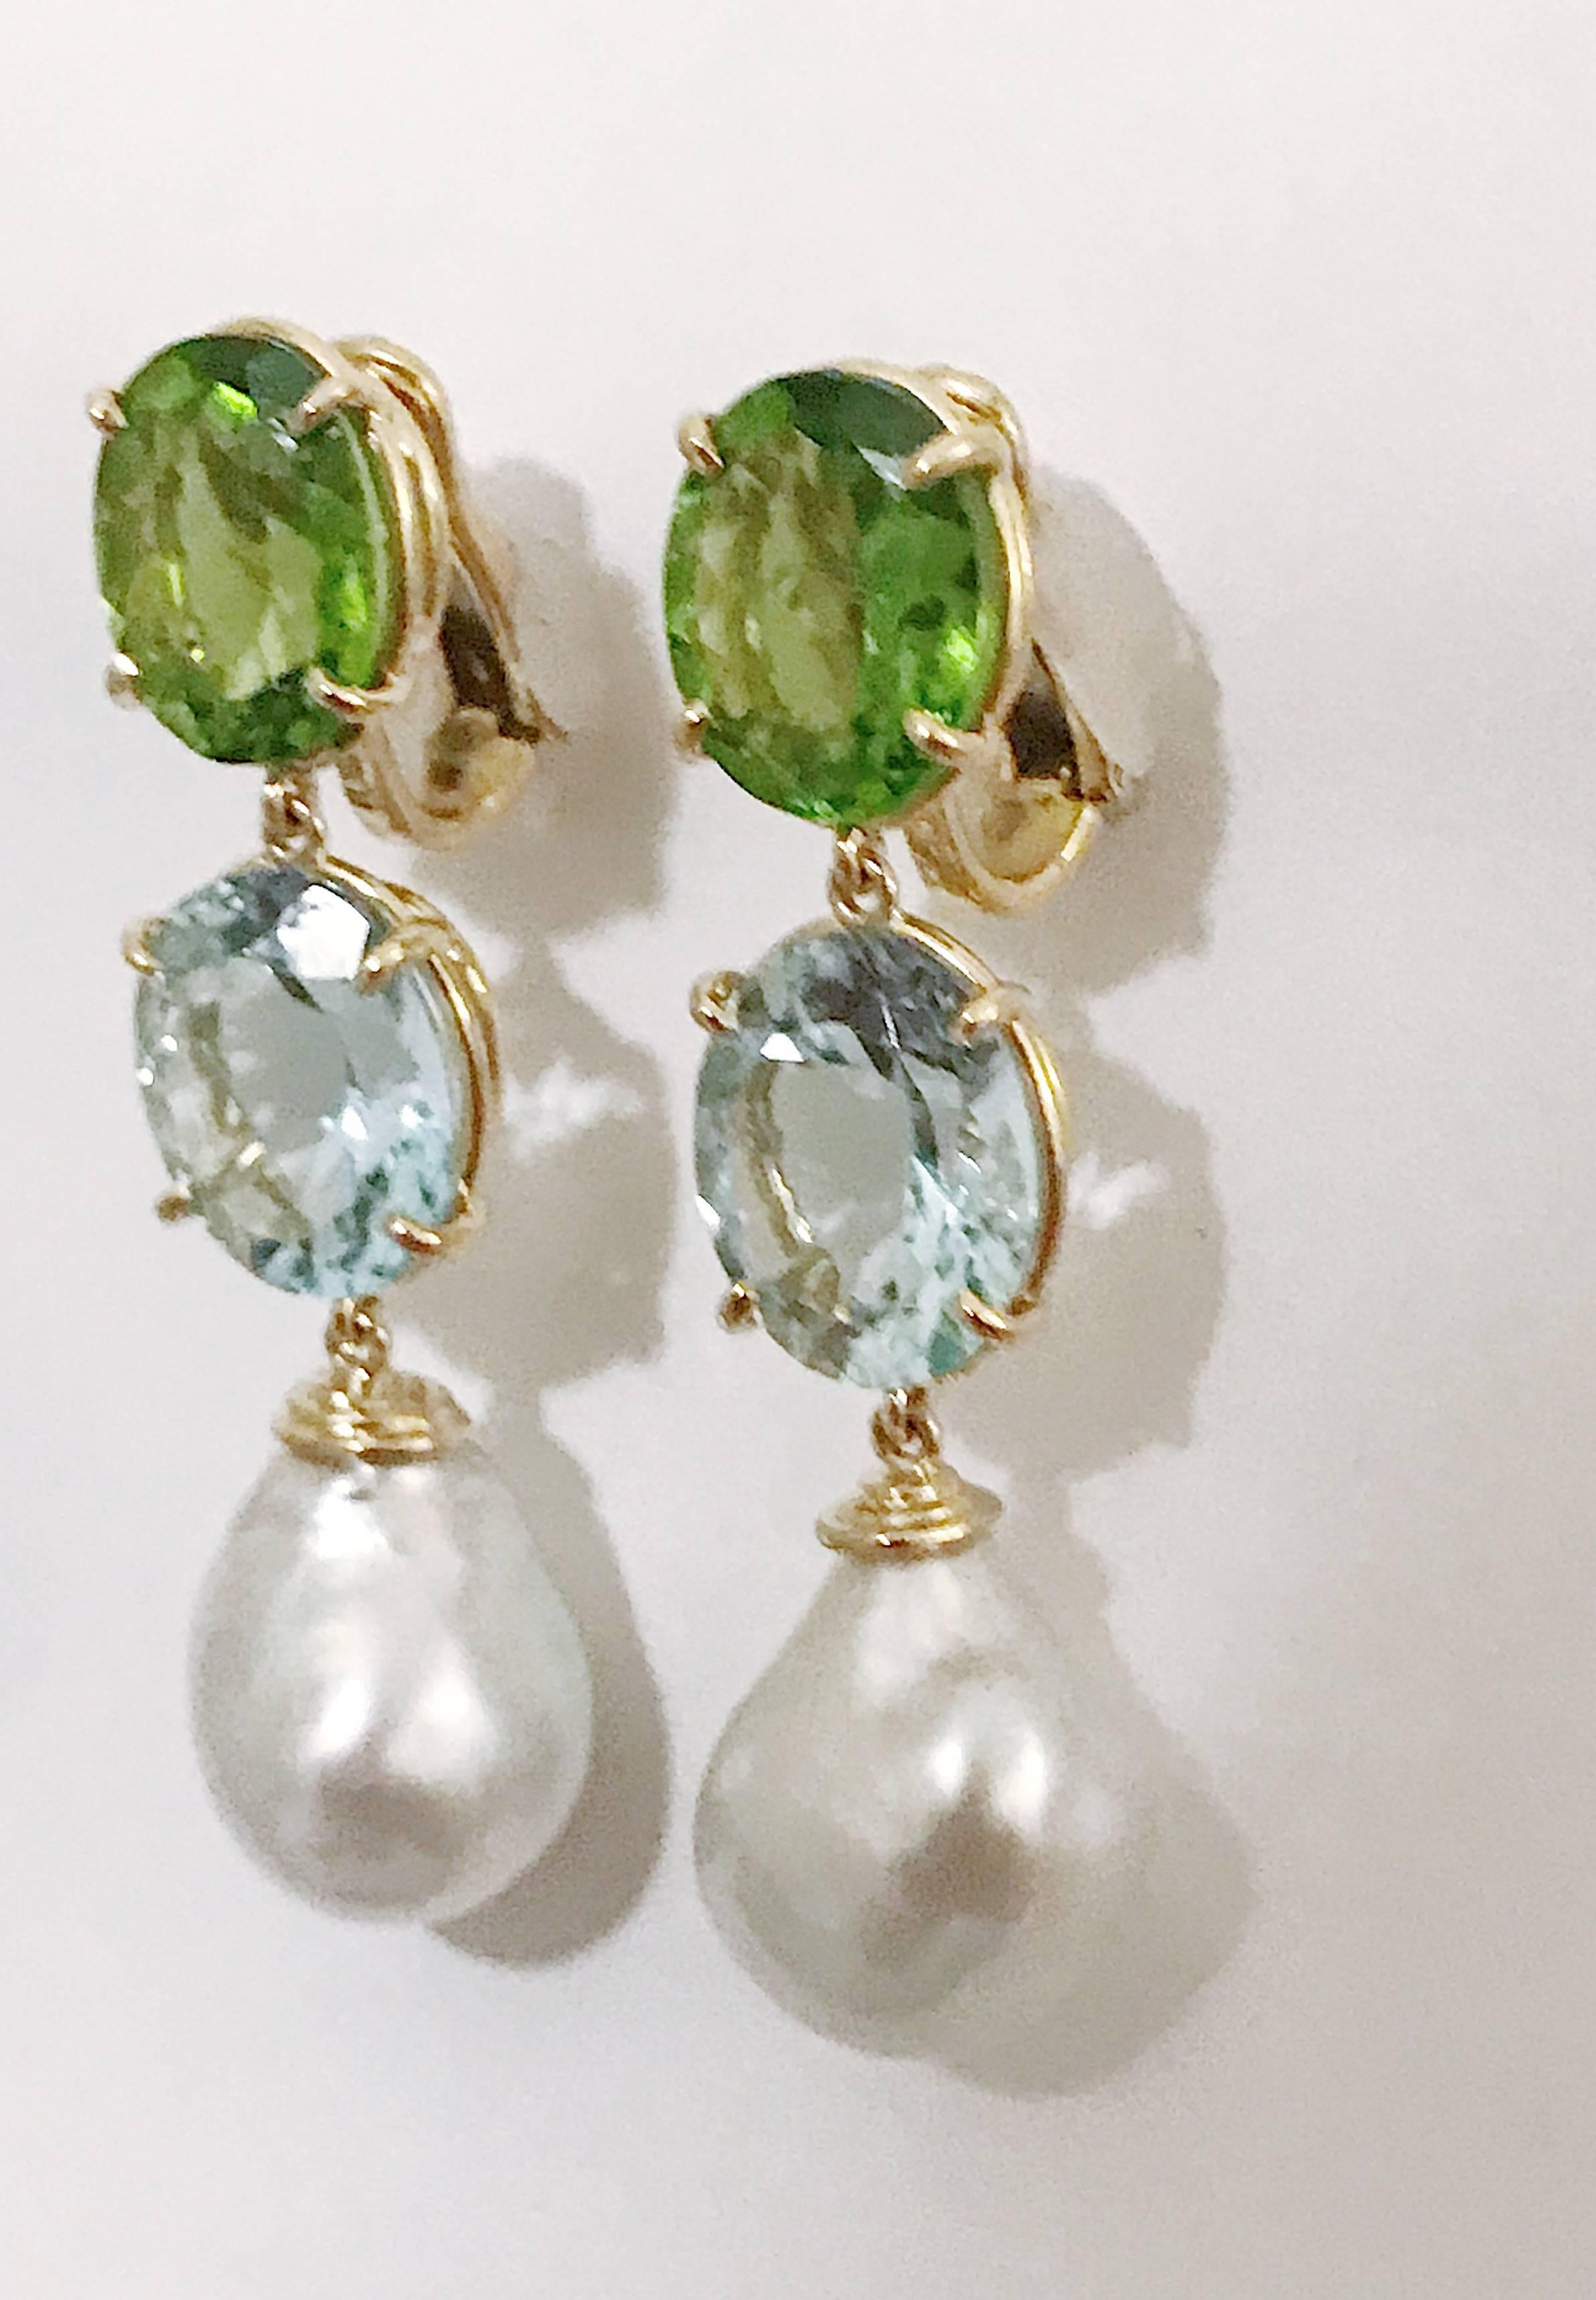 18kt Yellow Gold Elegant Three Stone Drop Earrings with faceted Peridot Aquamarine and South Sea Pearl.

They are stamped A. Clunn.

The Earrings measure 2 1/4 in length. The earrings can be made for Clip Earring or Pierced Earrings.

They can also